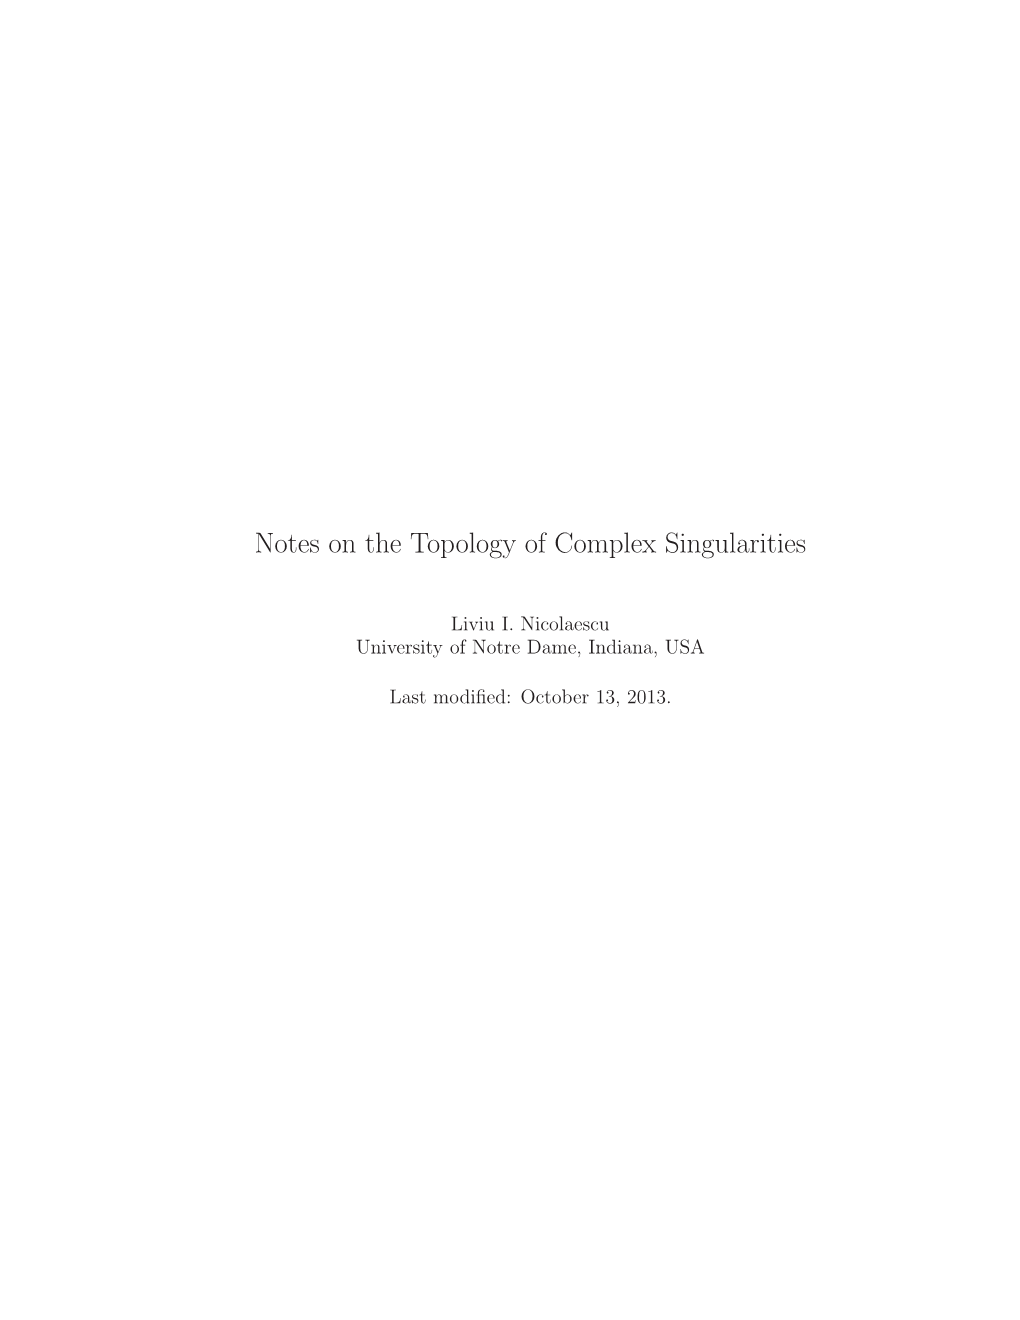 Notes on the Topology of Complex Singularities